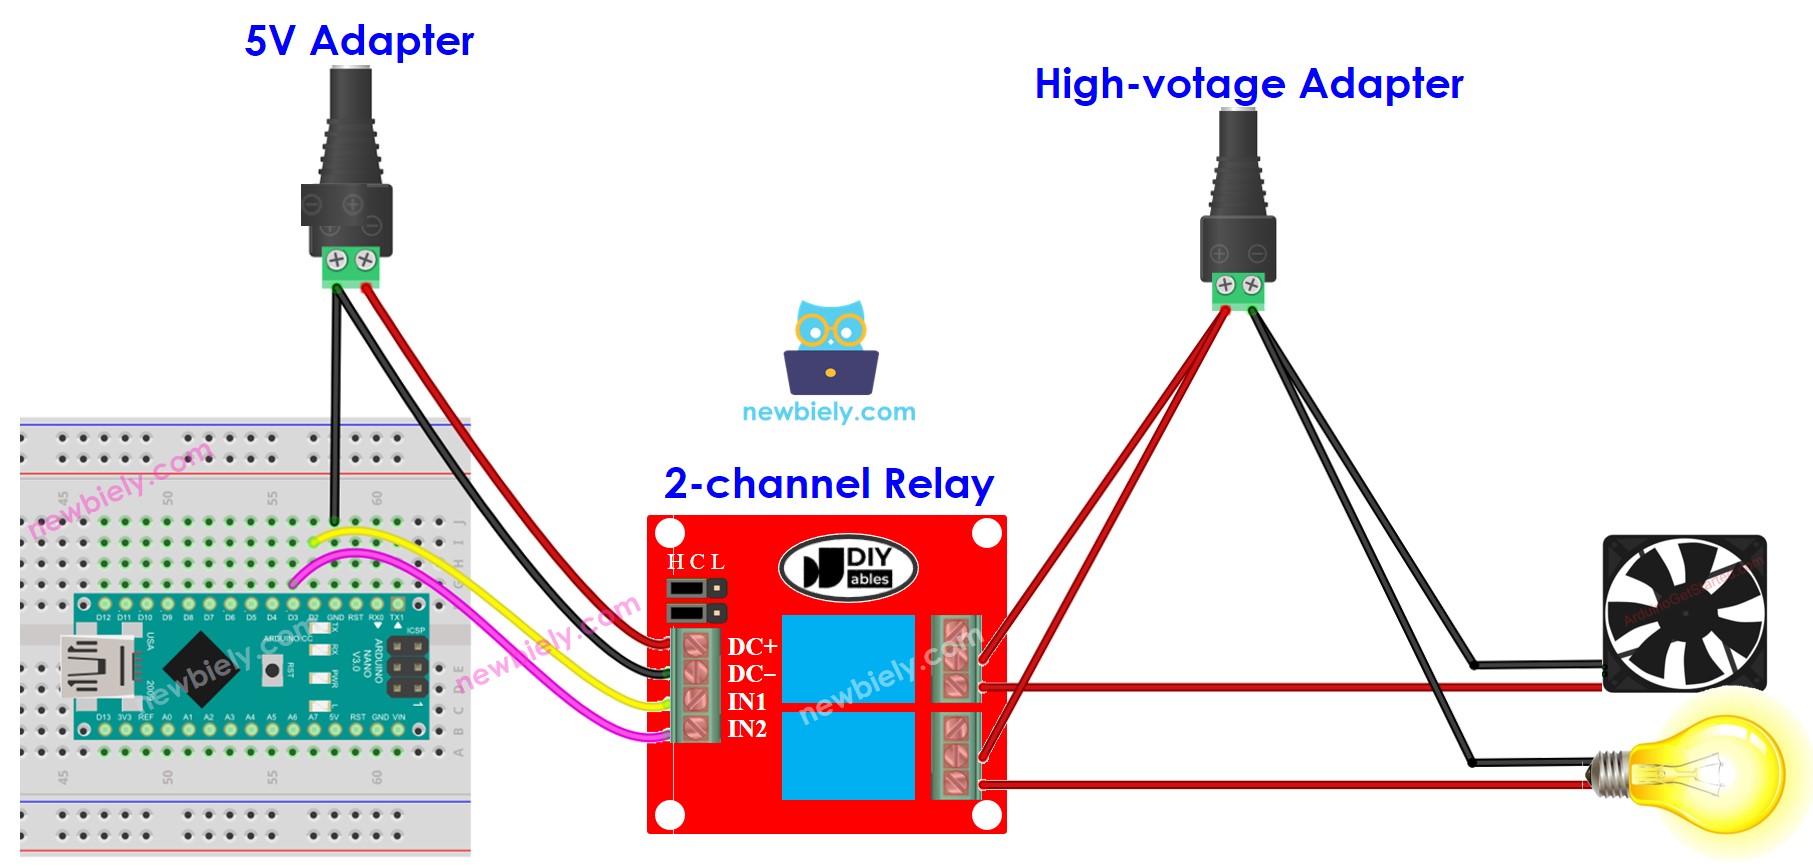 The wiring diagram between Arduino Nano and 2-channel relay module external power source